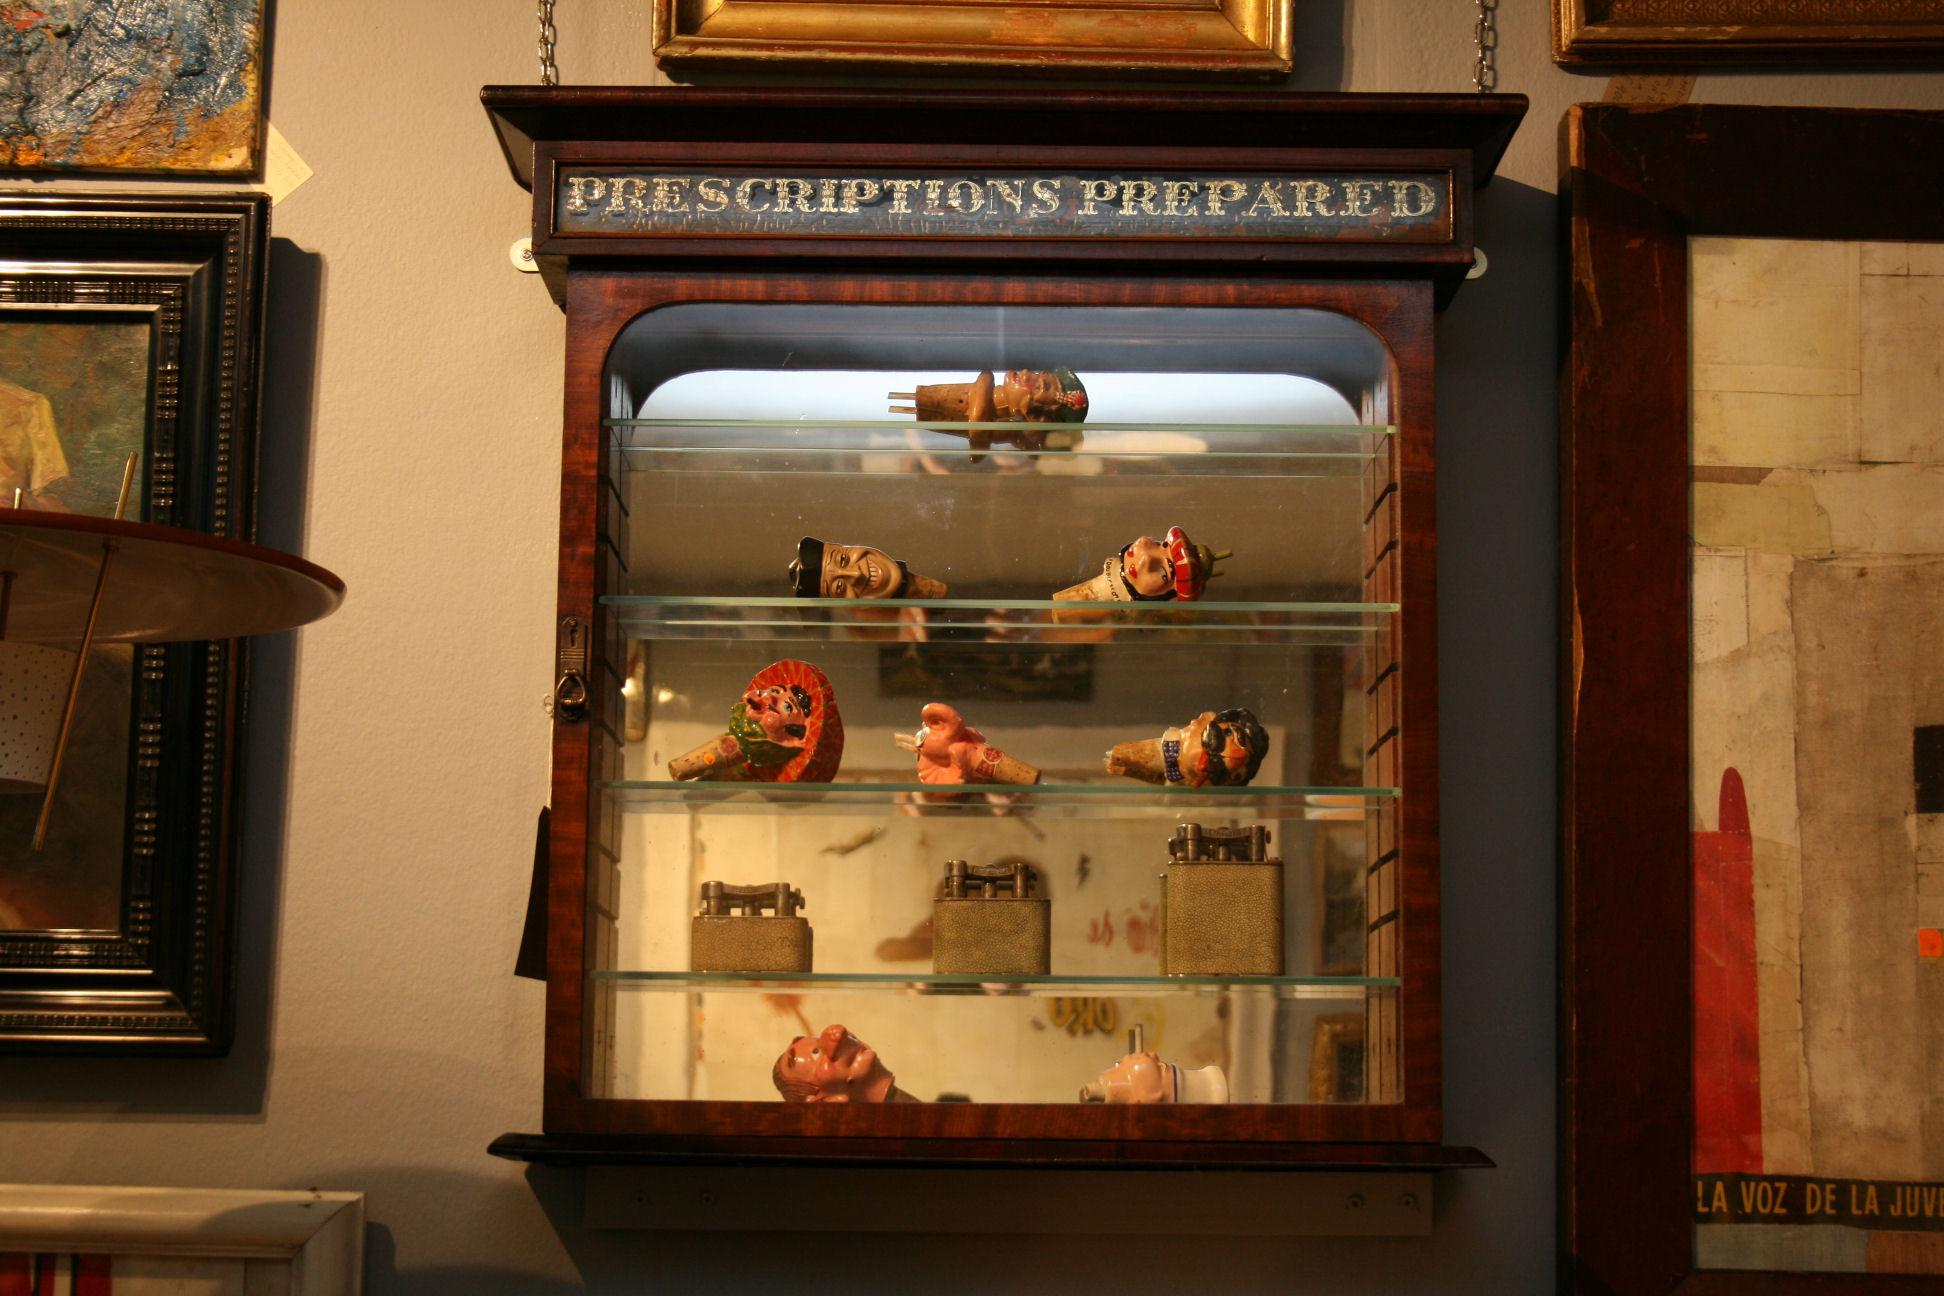 19th Century Antique Victorian chemist shop pharmacy cabinet.
This Pharmacy cabinet dates back to the 1870s.
It has been repolished and the inside mirror and glass shelves have been replaced.
It is in good condition for its age with just a little